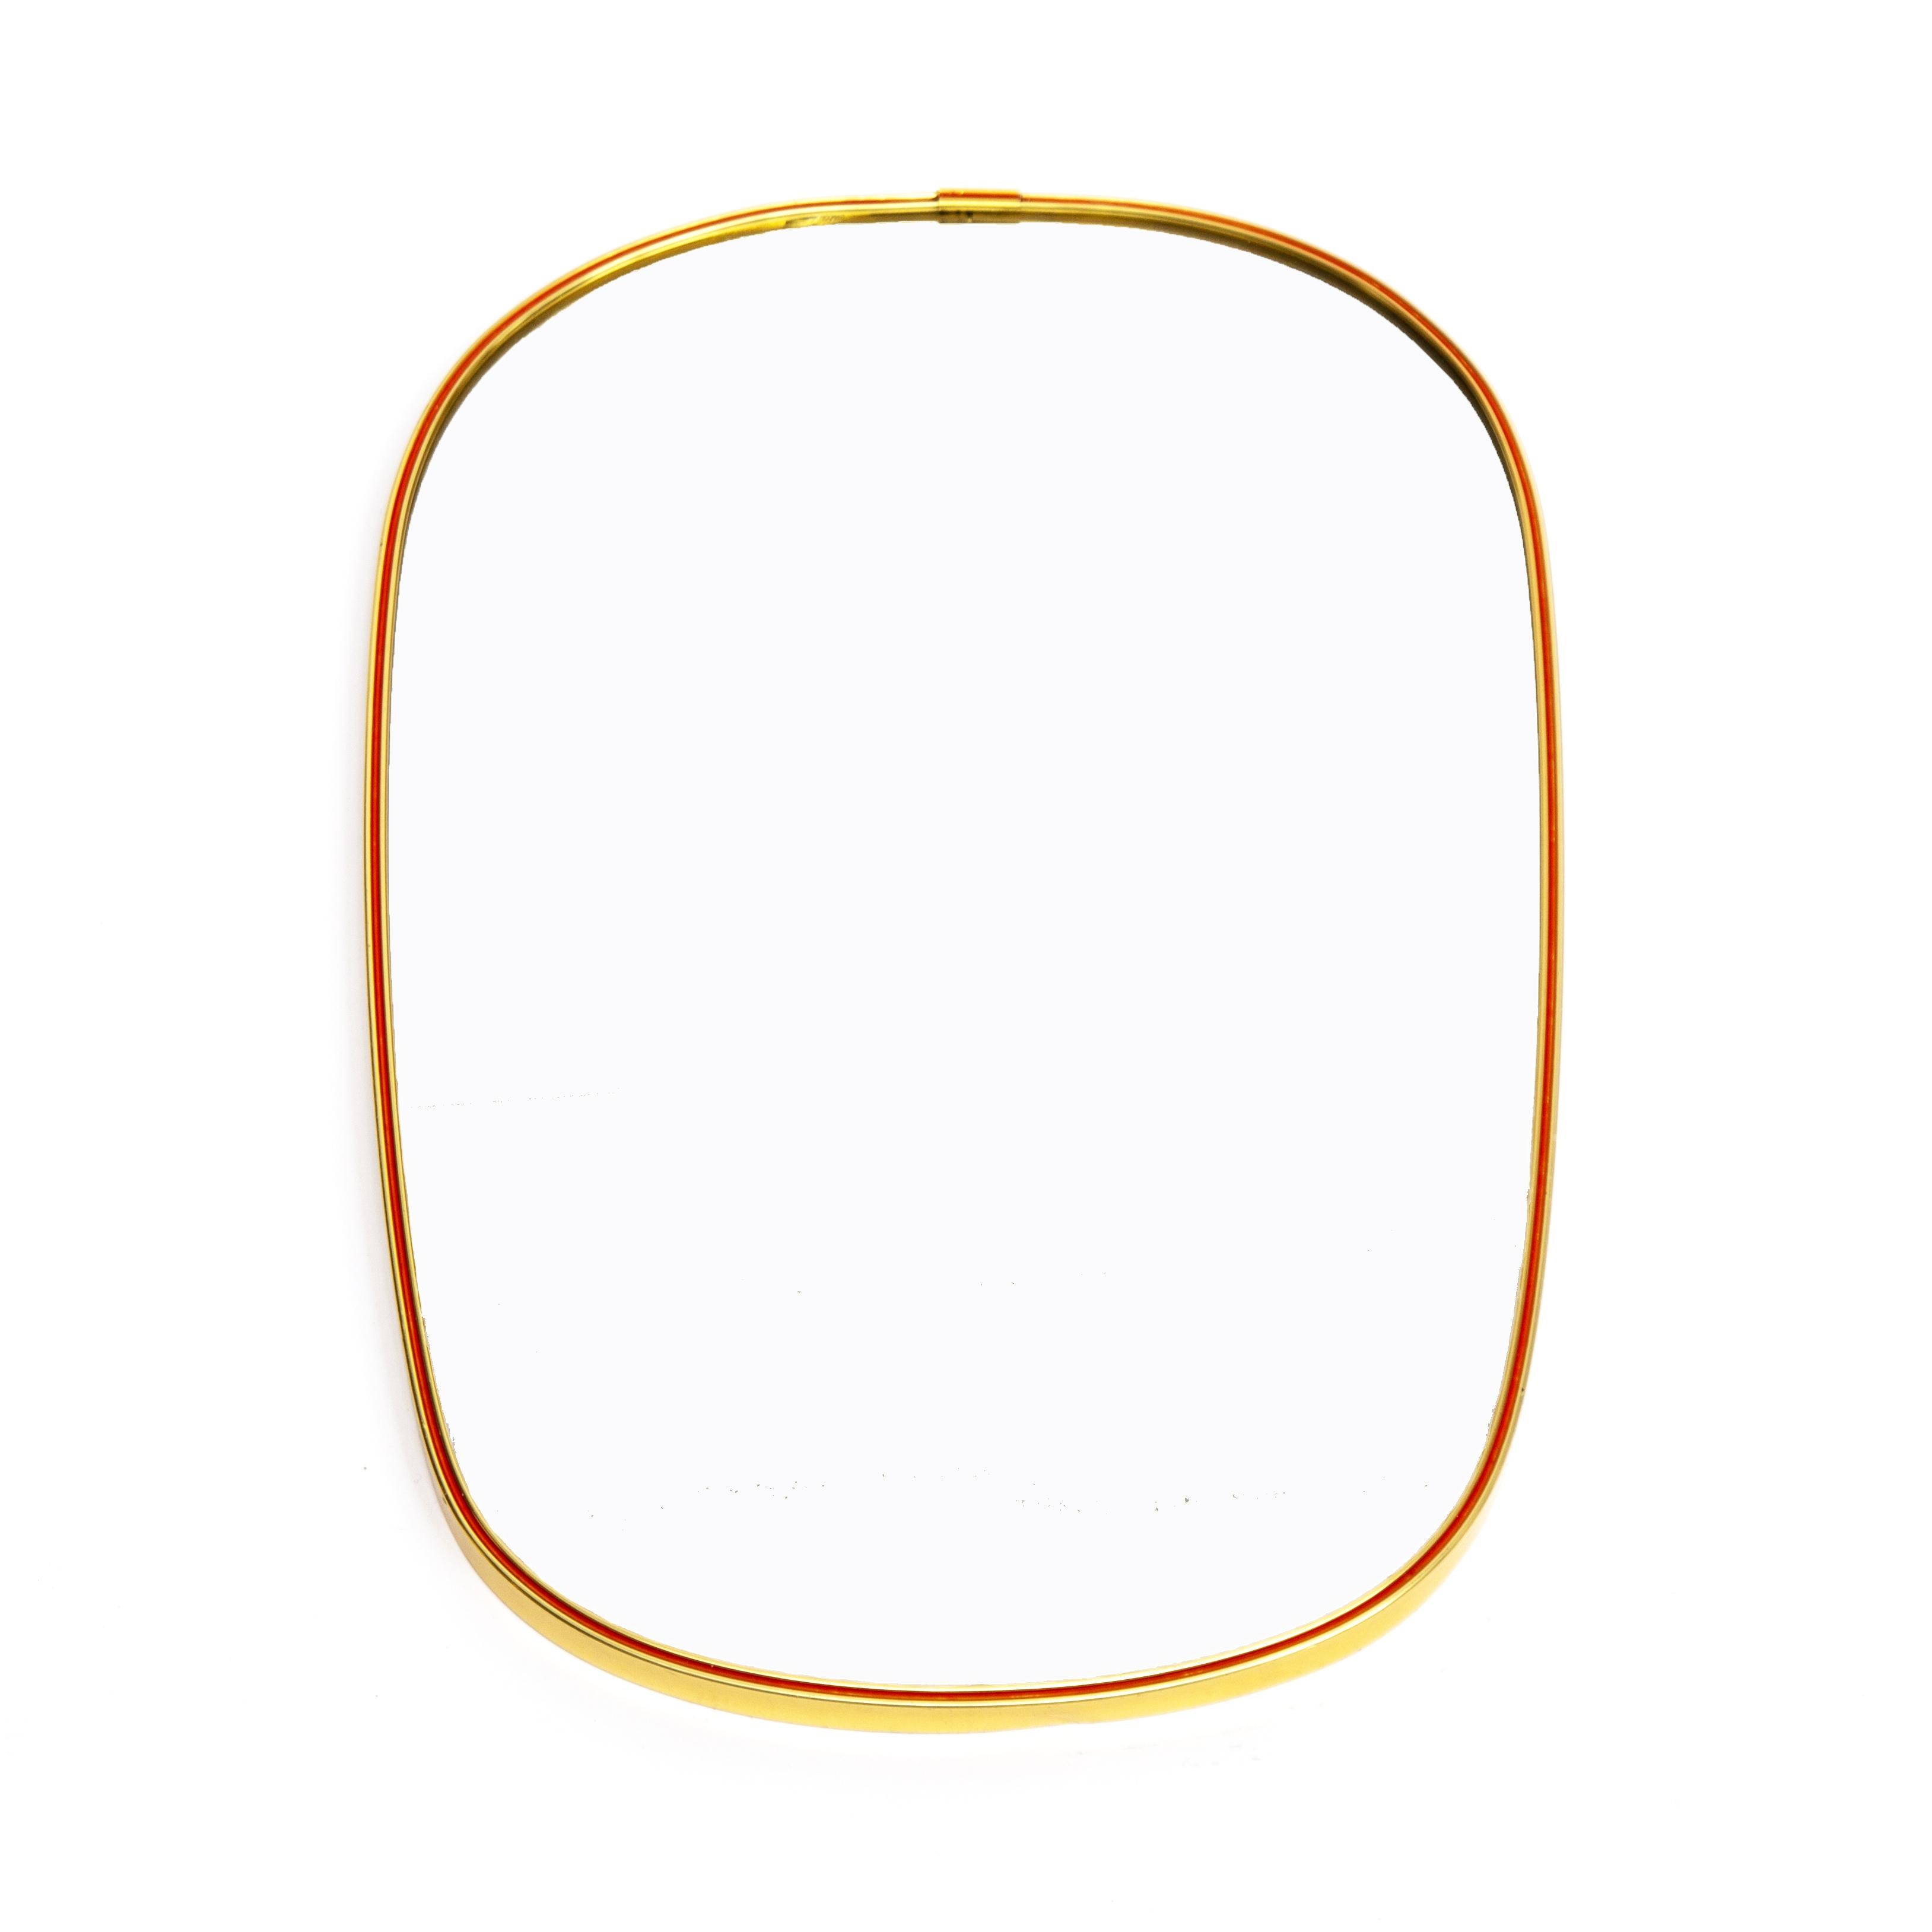 Anodized Midcentury Oval Shaped Brass Mirror, 1950s